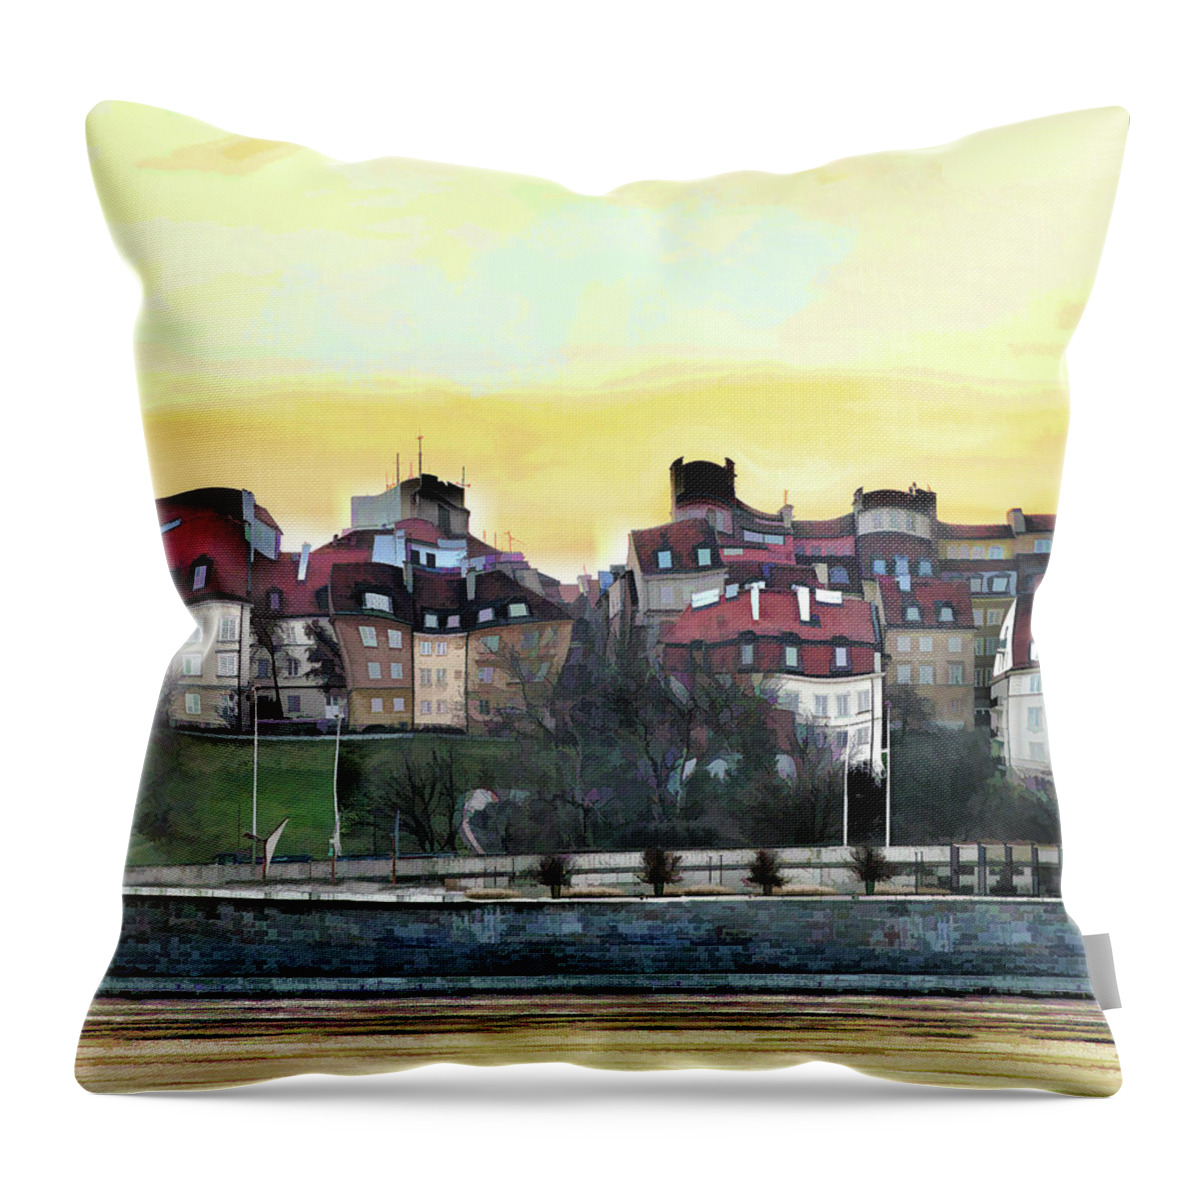  Throw Pillow featuring the photograph Old Town in Warsaw # 16 2/4 by Aleksander Rotner